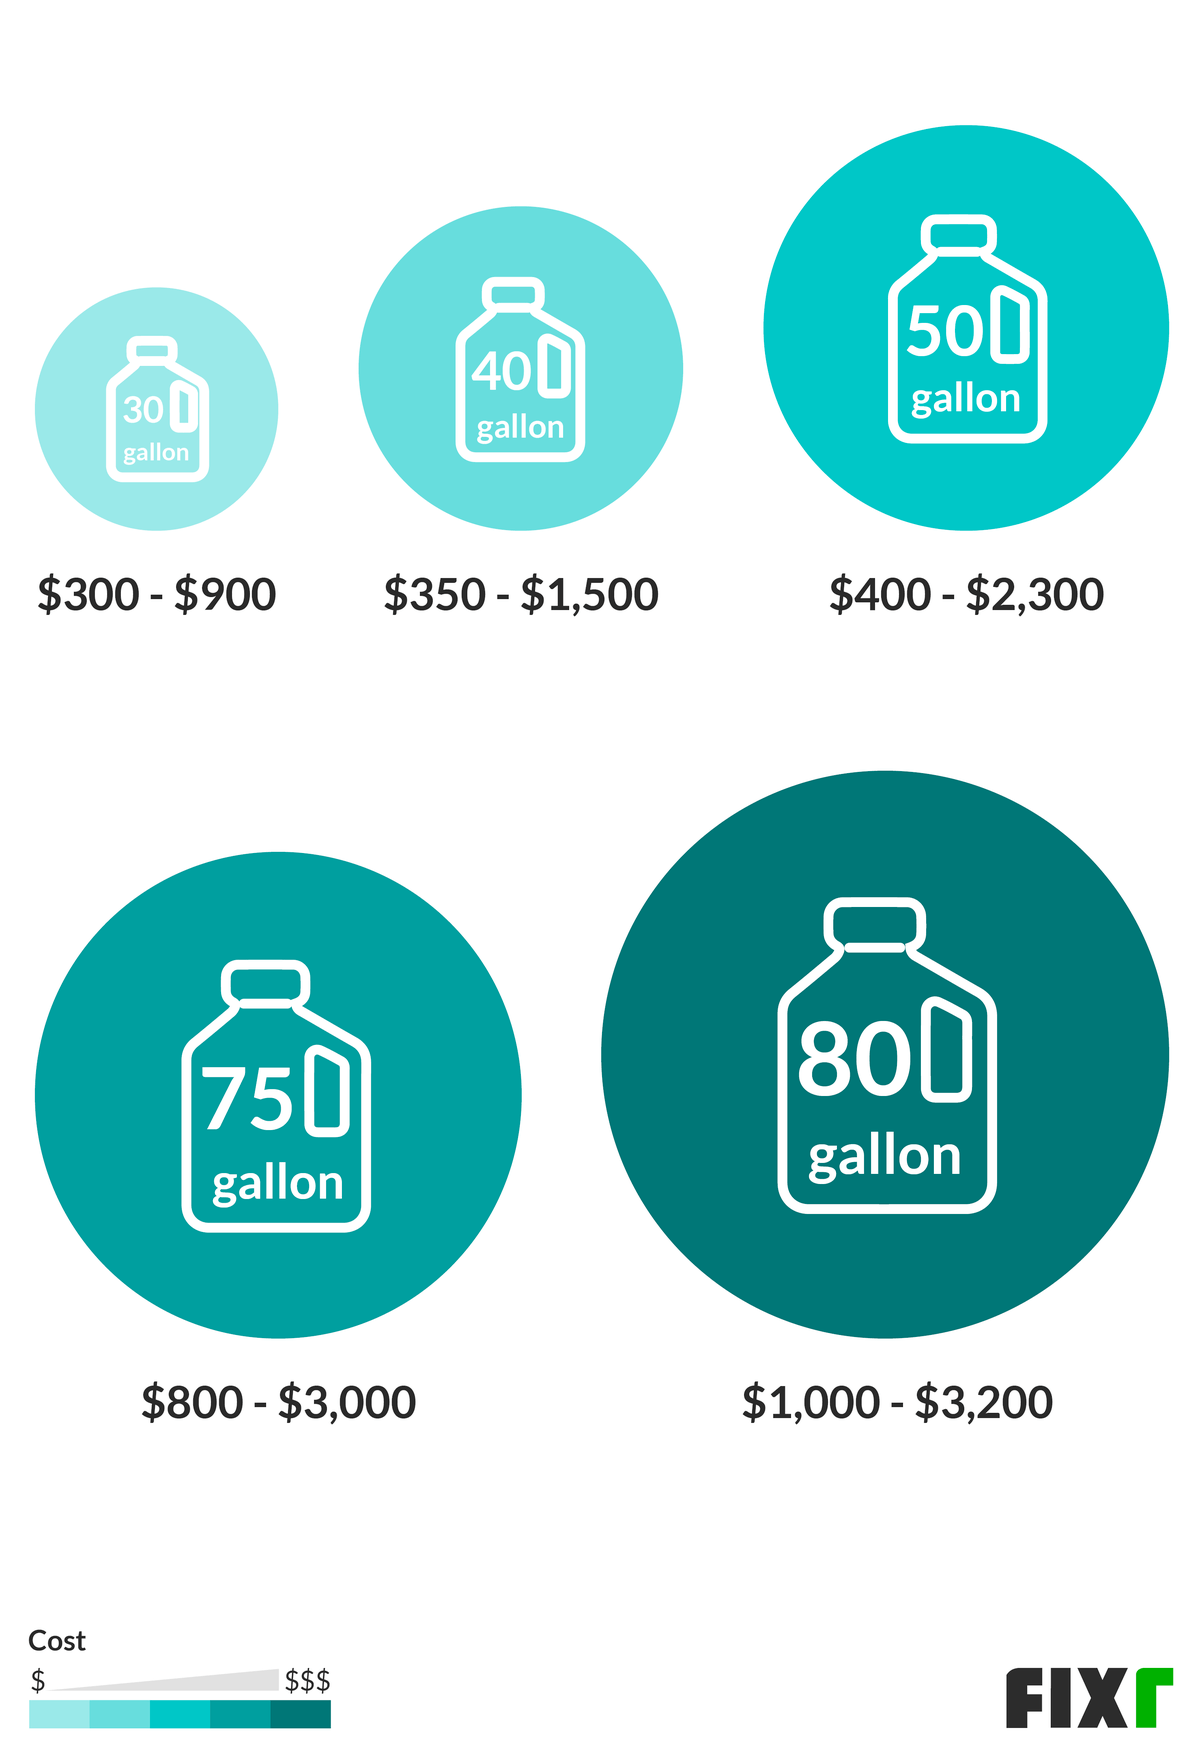 Average Cost of a 30, 40, 50, 75, or 80-Gallon Water Heater